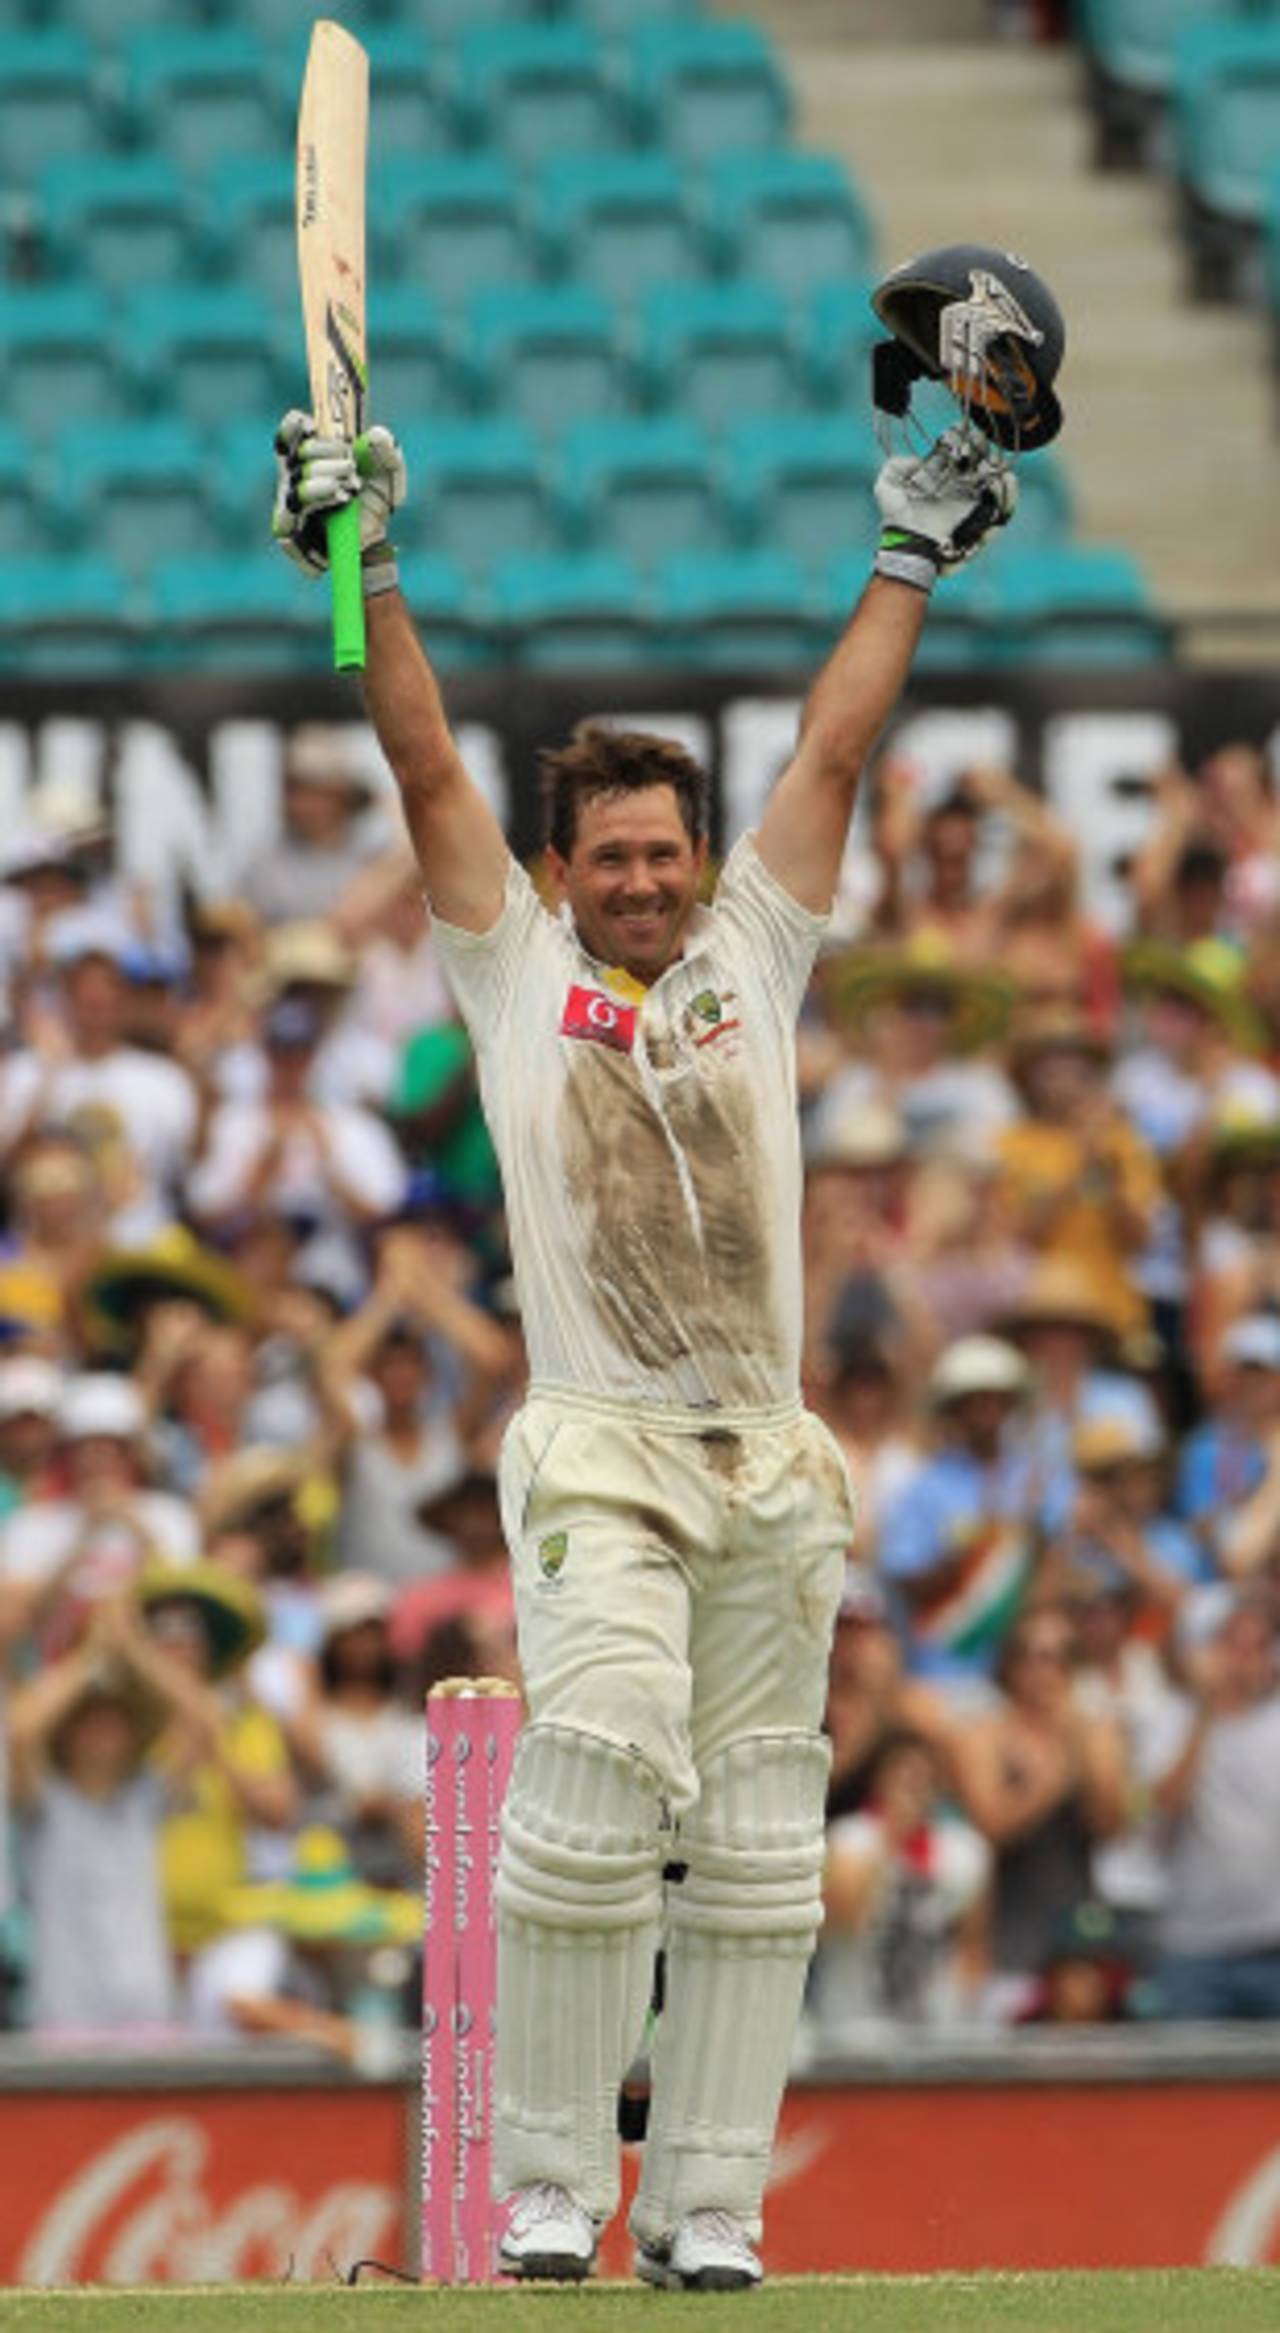 Ricky Ponting stands arms aloft after completing his 40th Test hundred, Australia v India, 2nd Test, Sydney, 2nd day, January 4, 2012